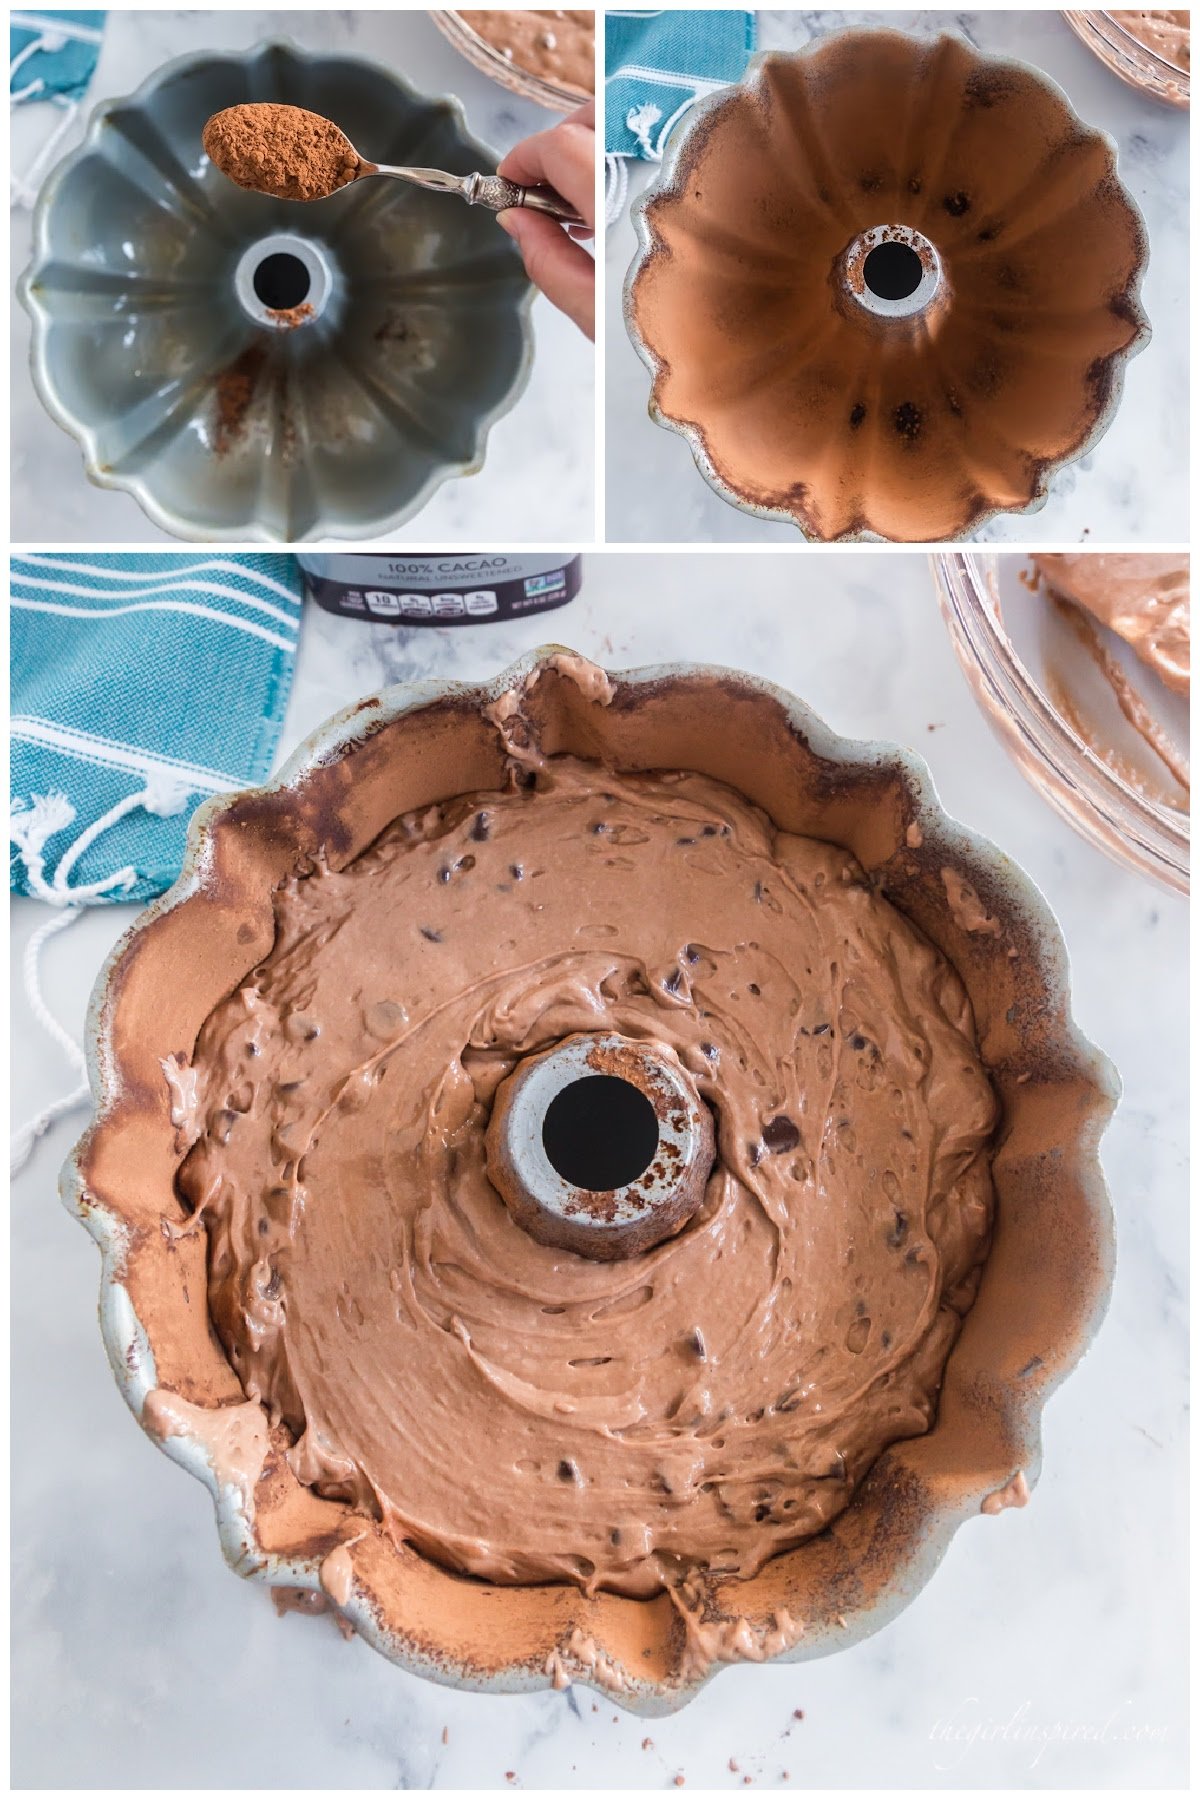 Cake batter poured into the prepared bundt pan.